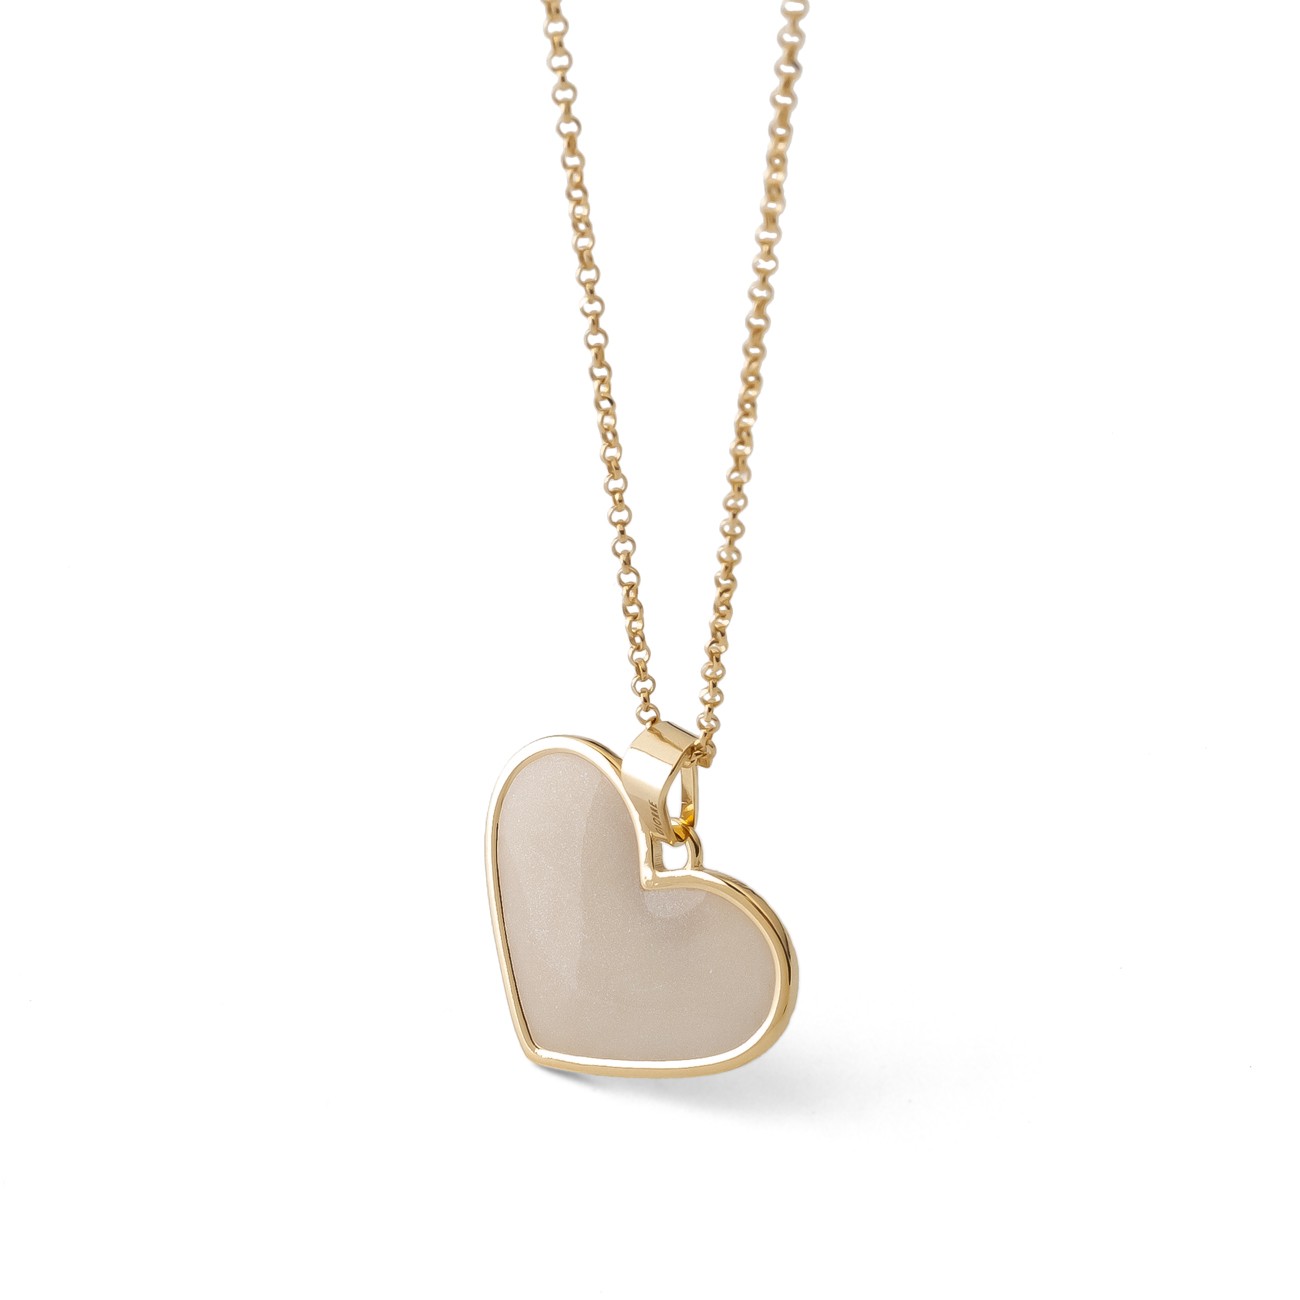 White resin heart necklace, sterling silver 925